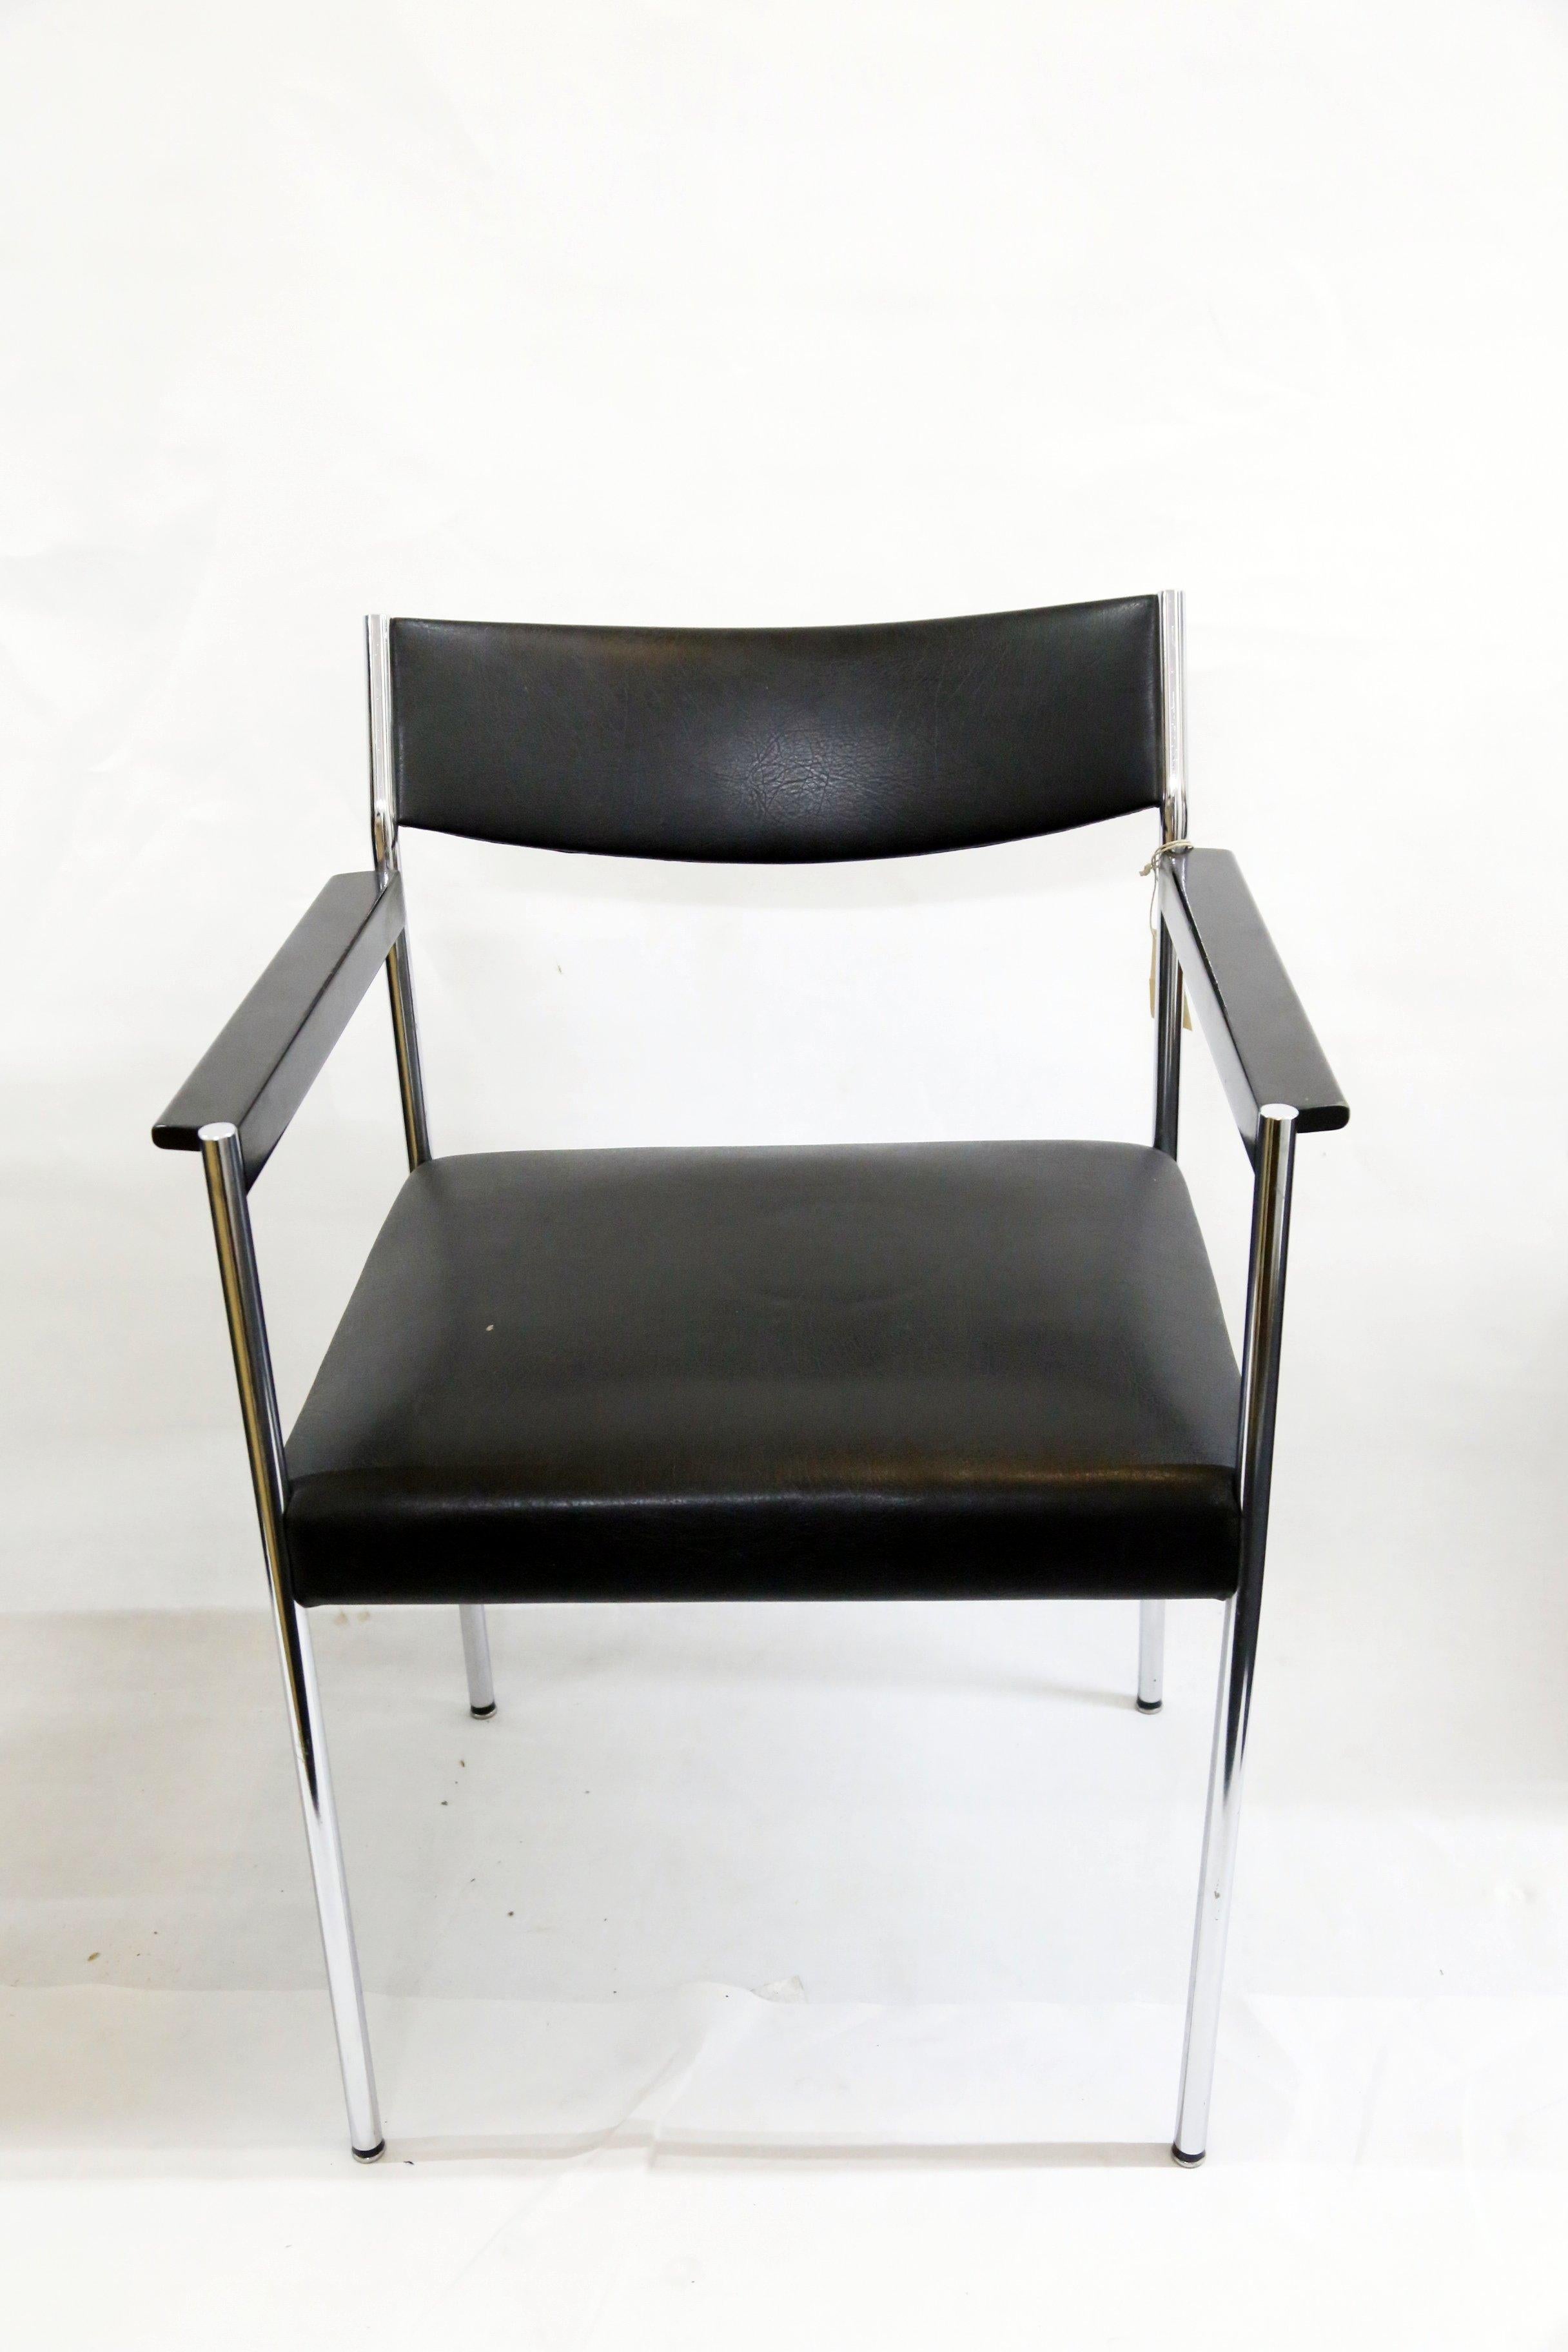 Austrian armchairs, set of 4, from Brüder Fellner, 1970s
Leather and chrome, great condition.
Made by Brüder Fellner Handelges. m. b. h.
Paper stamped by maker.
This vintage item has no defects, but it may show slight traces of use.
Light wear